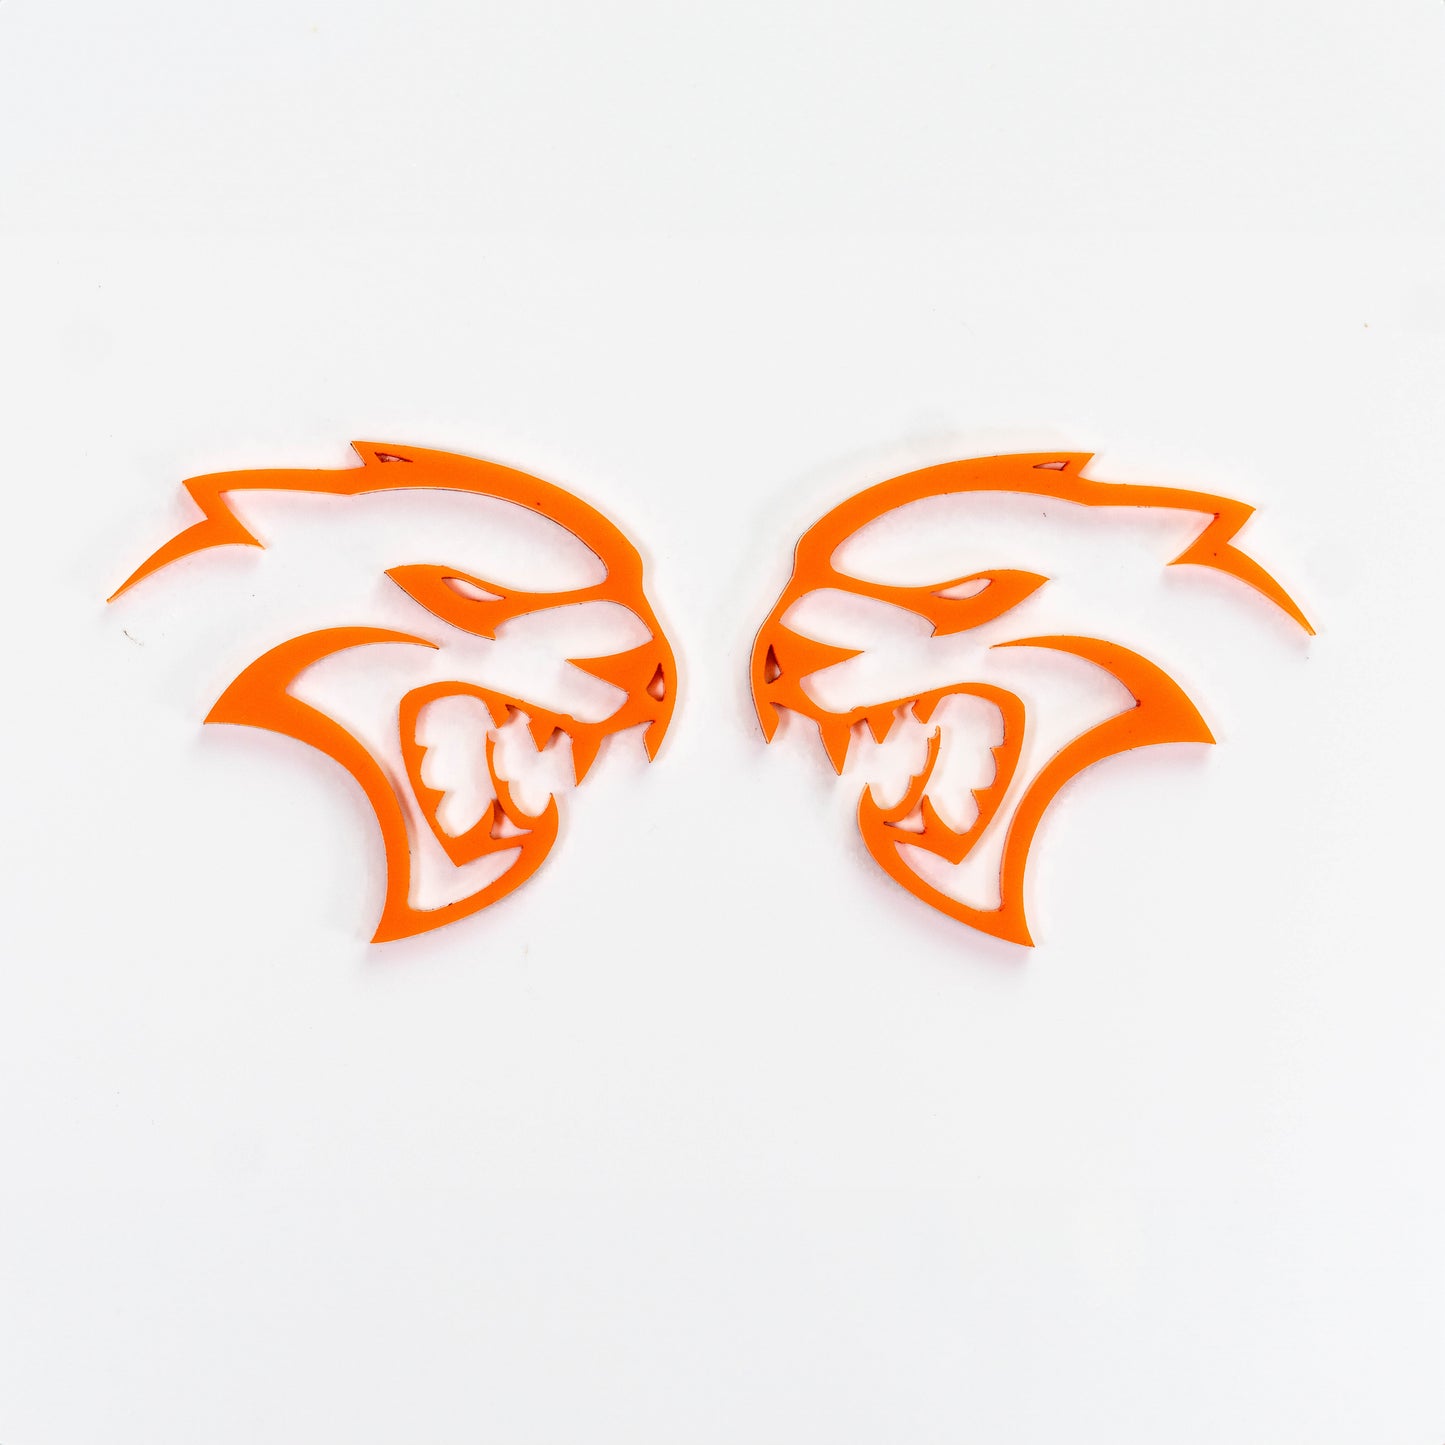 Hellcat® Fender Badge Pair - Officially Licensed Product